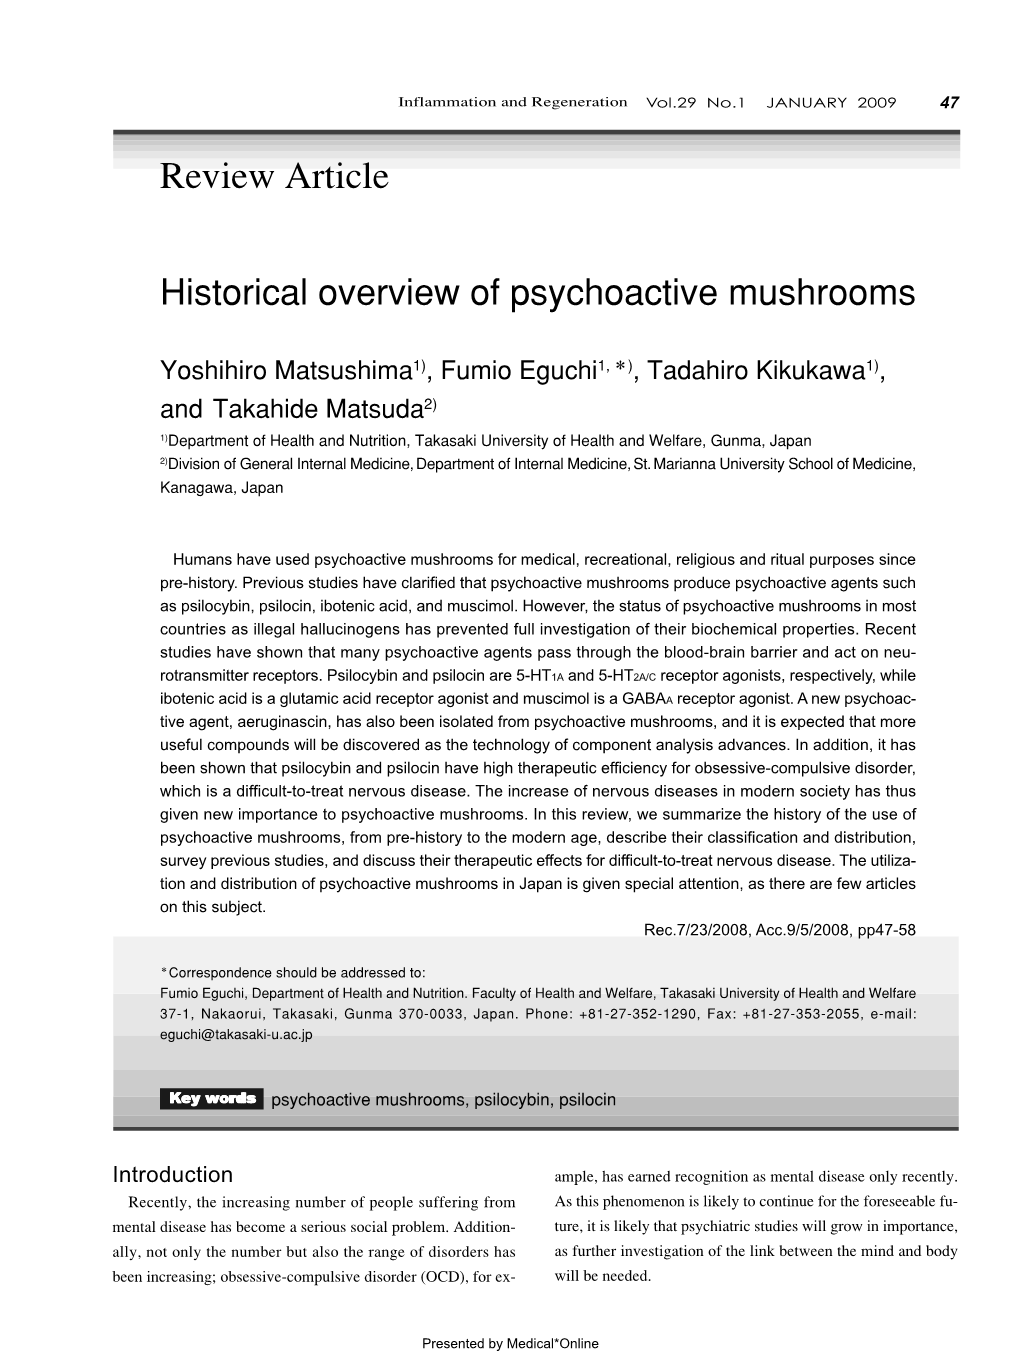 Historical Overview of Psychoactive Mushrooms